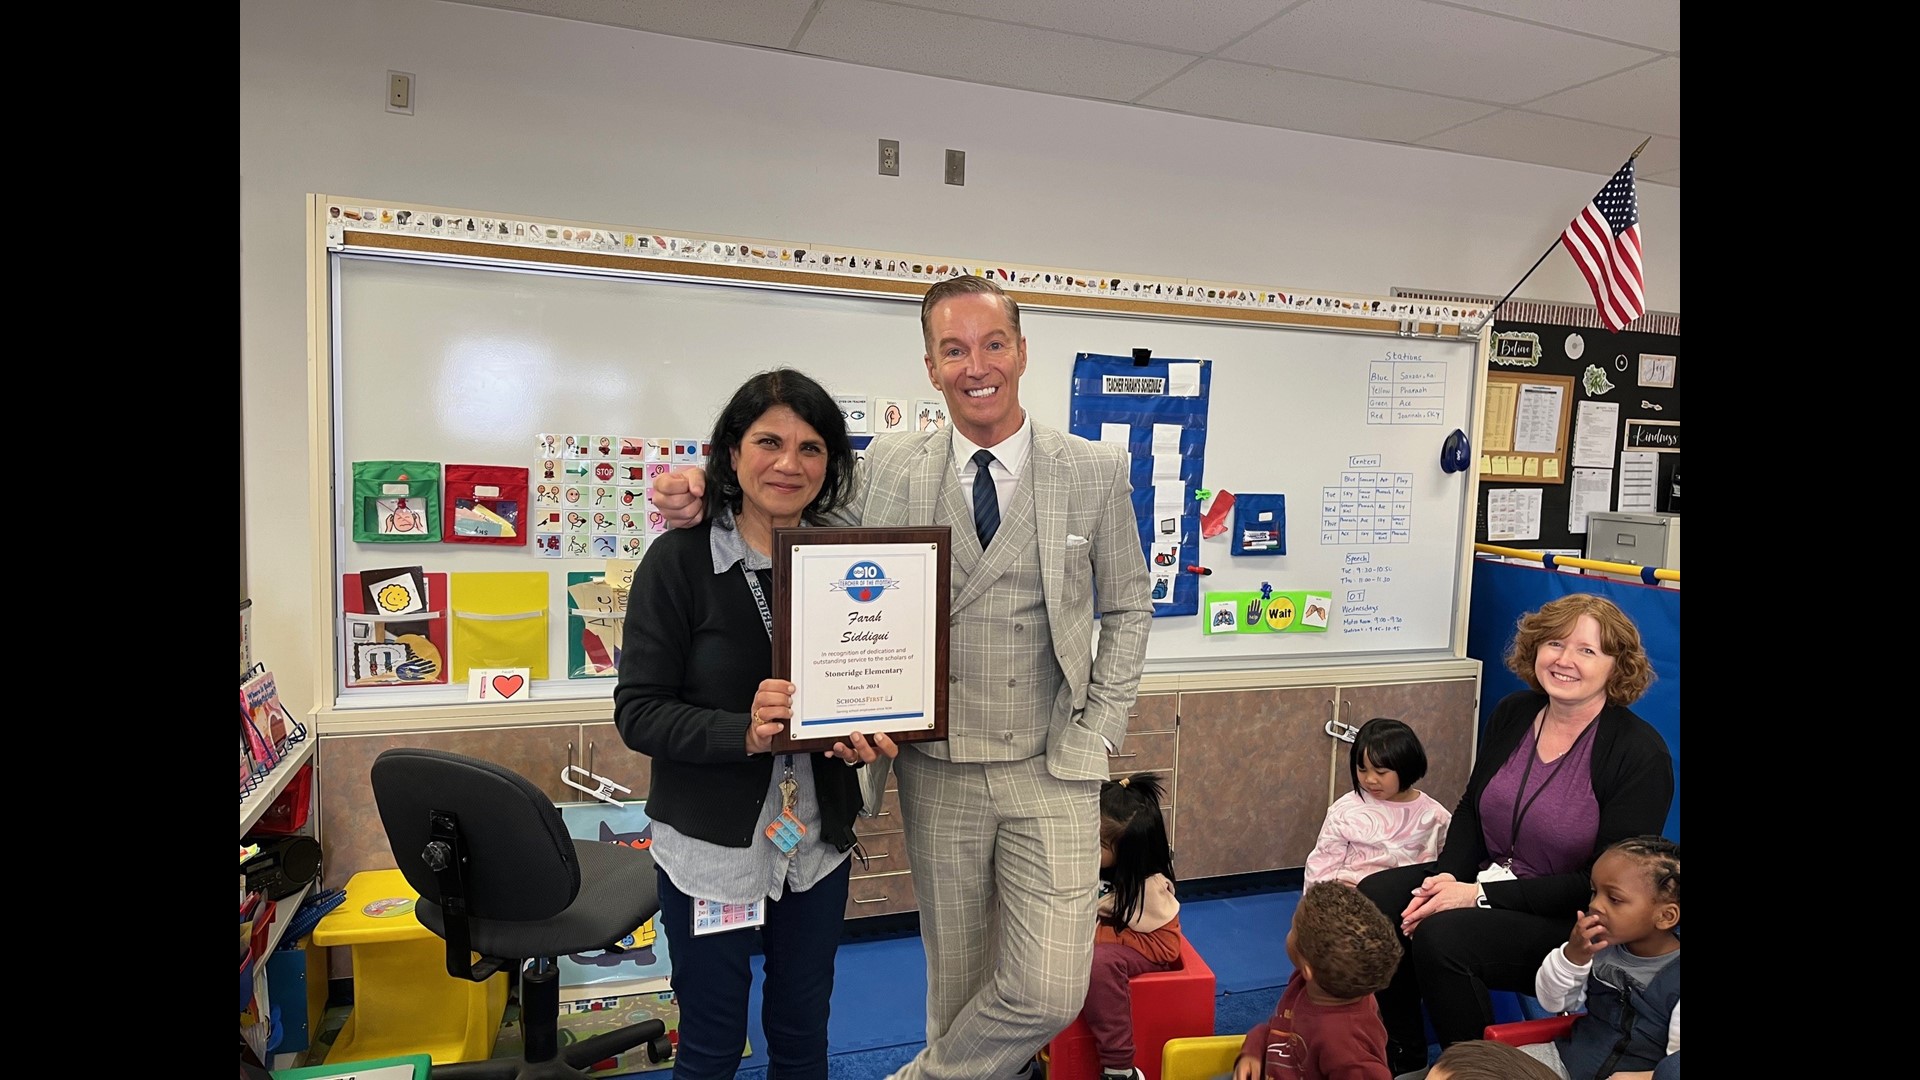 Ms. Siddiqui is an Early Childhood Special Education teacher for the Special Education Preschool program at Stoneridge Elementary in Roseville, CA.